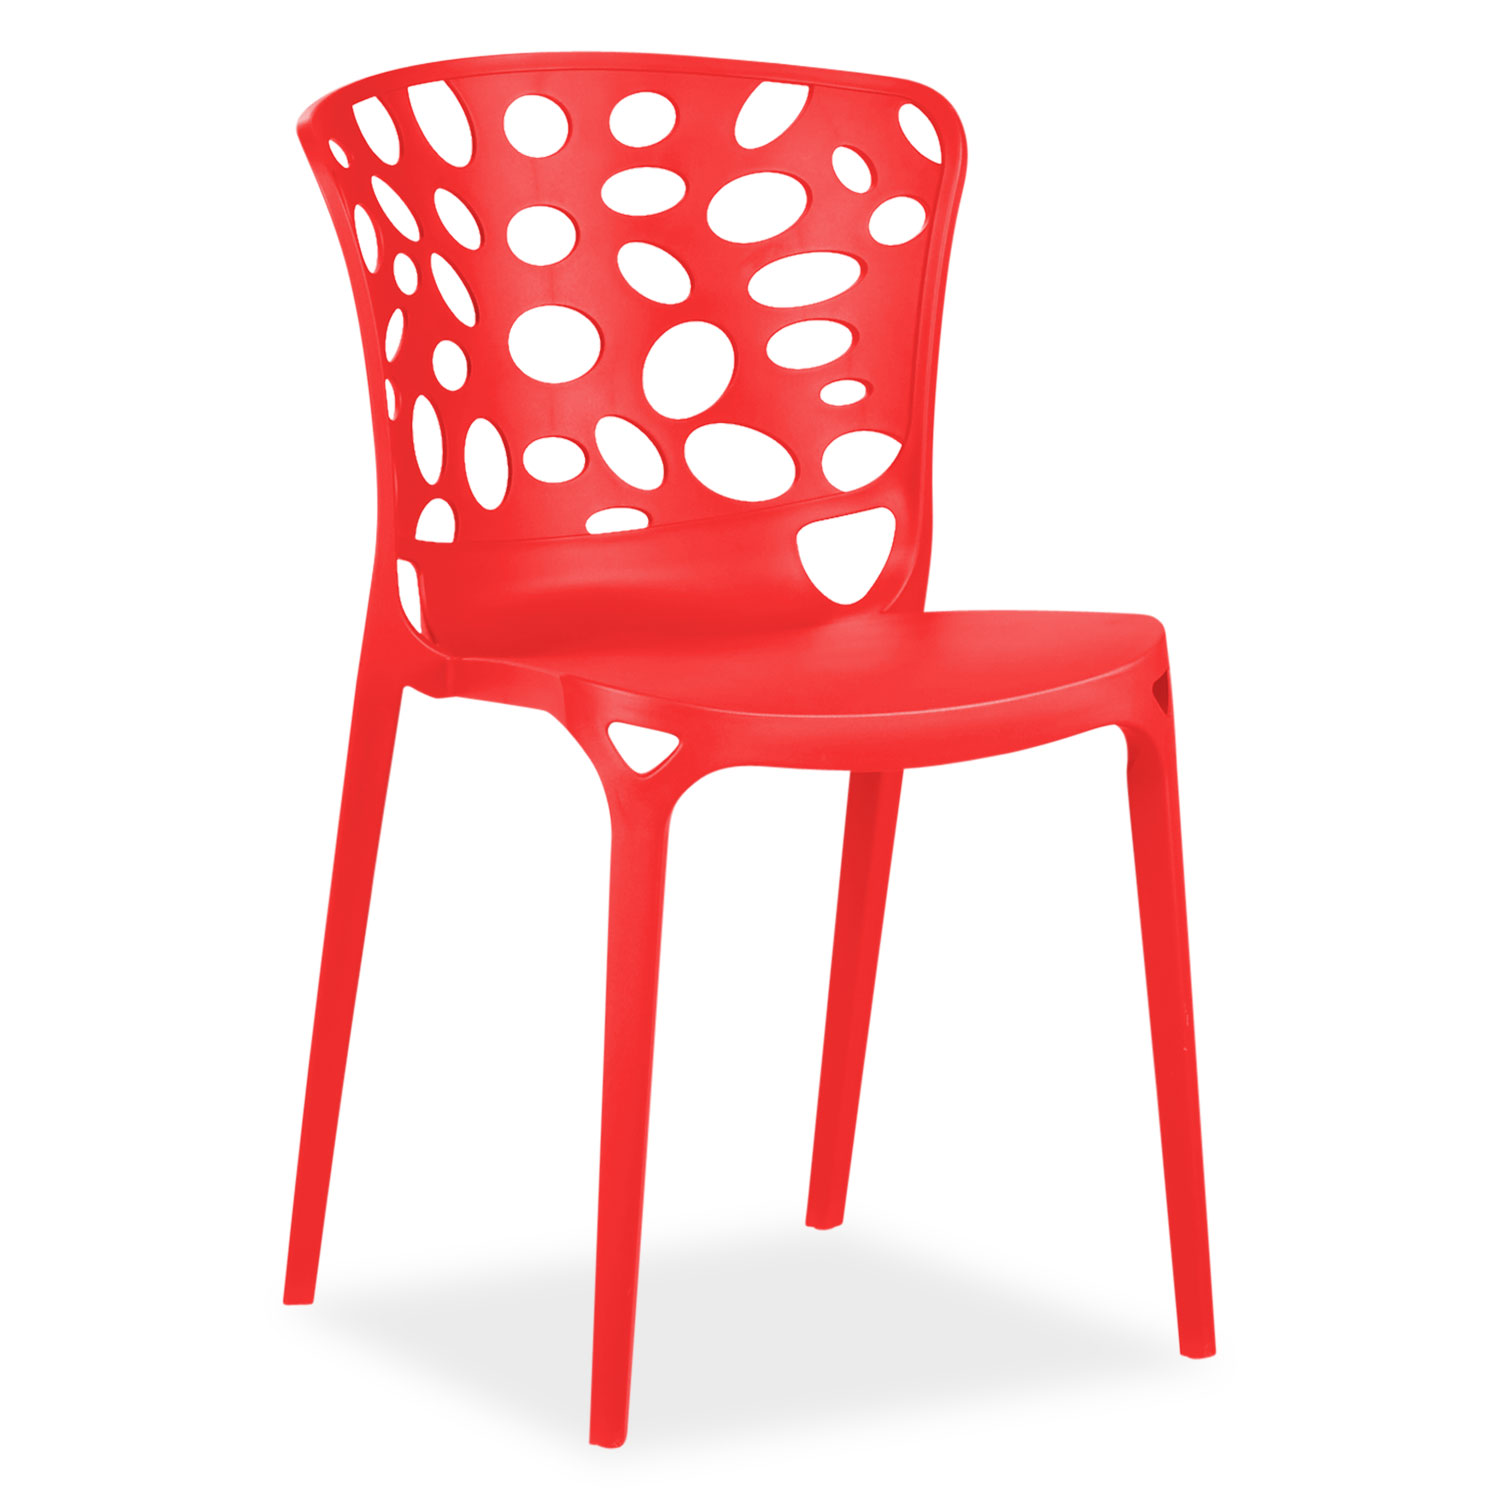 Garden chair Set of 2 Modern Red Camping chairs Outdoor chairs Plastic Stacking chairs Kitchen chairs